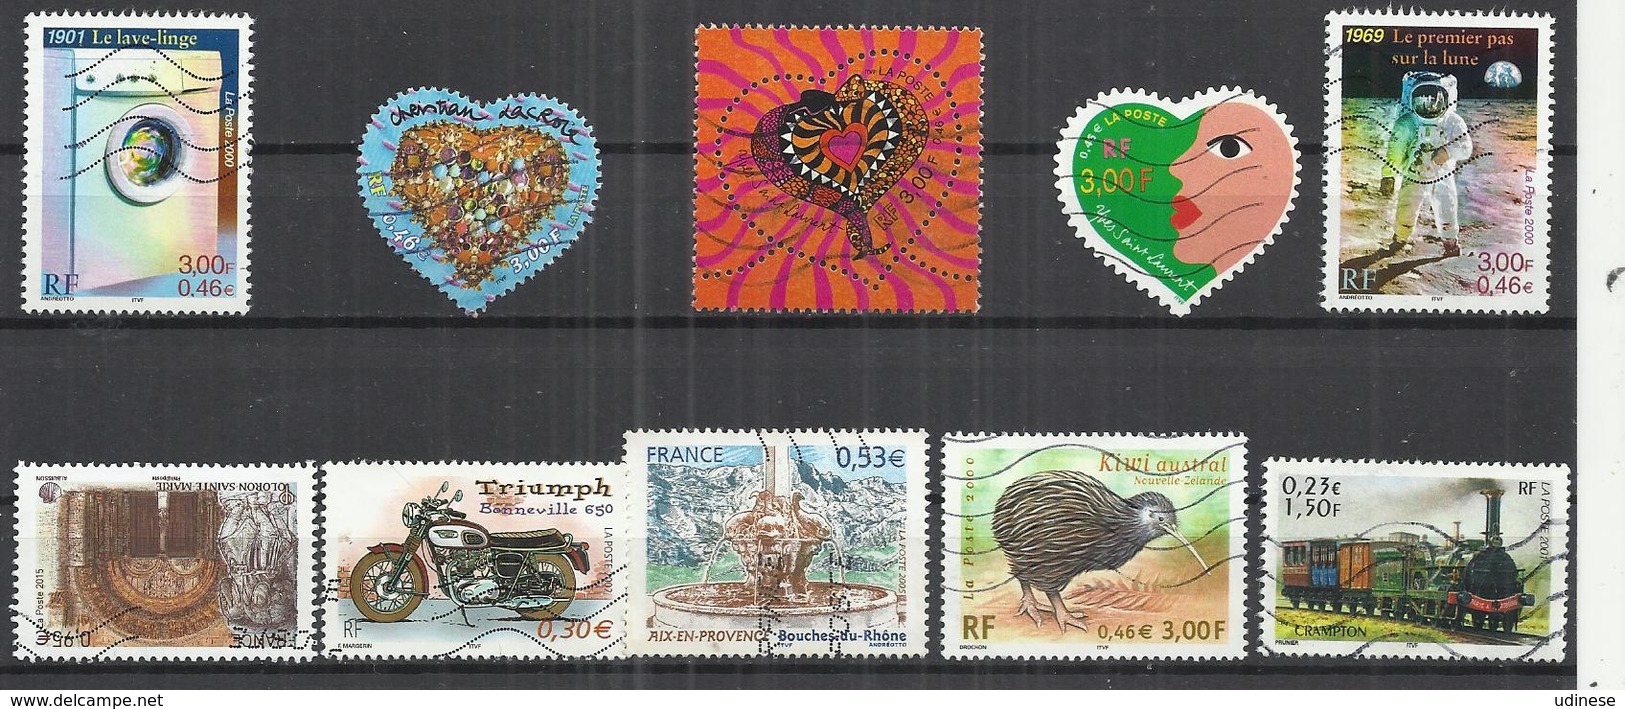 TEN AT THE TIME - FRANCE MIXED YEARS - LOT OF 10 DIFFERENT 2 - OBLITERE USED GESTEMPELT USADO - Collectors